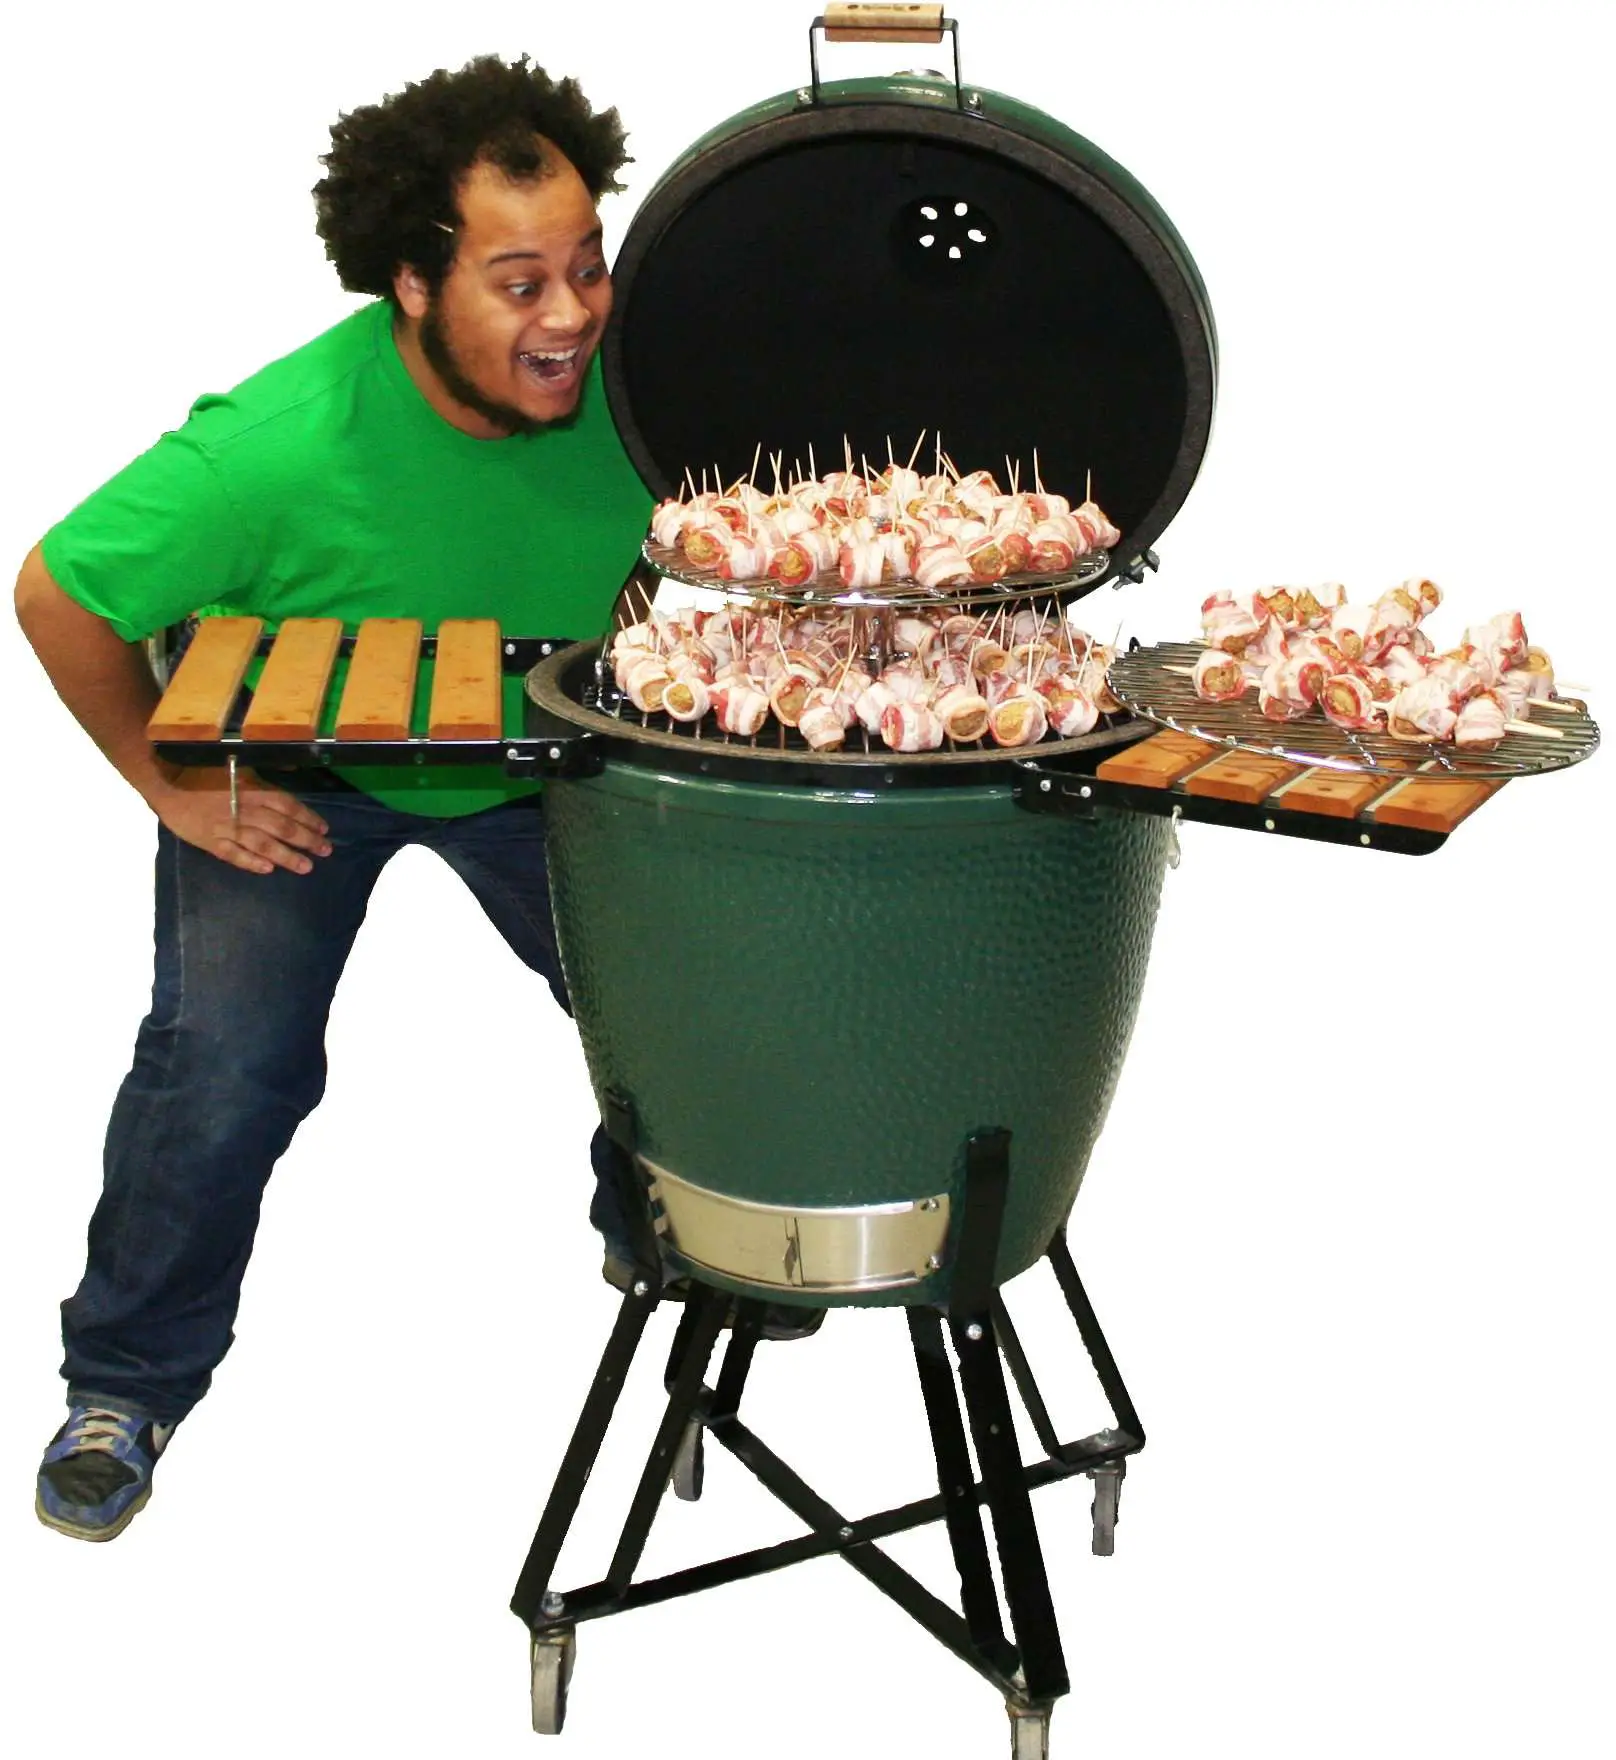 So you like to BBQ? Is the Big Green Egg Grill Worth It ...